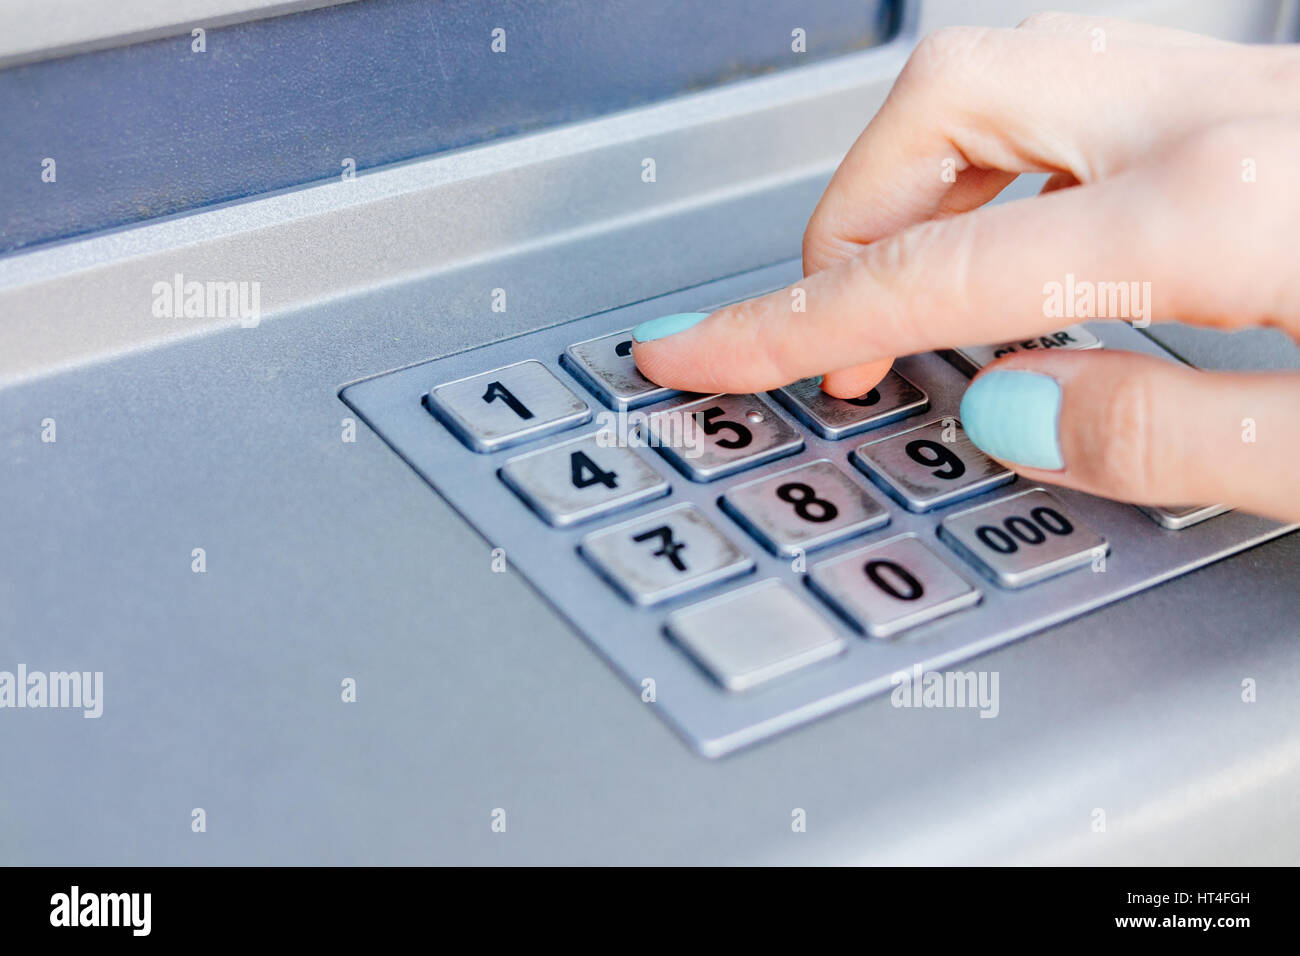 Ladies hand dials the PIN code at an ATM close-up Stock Photo